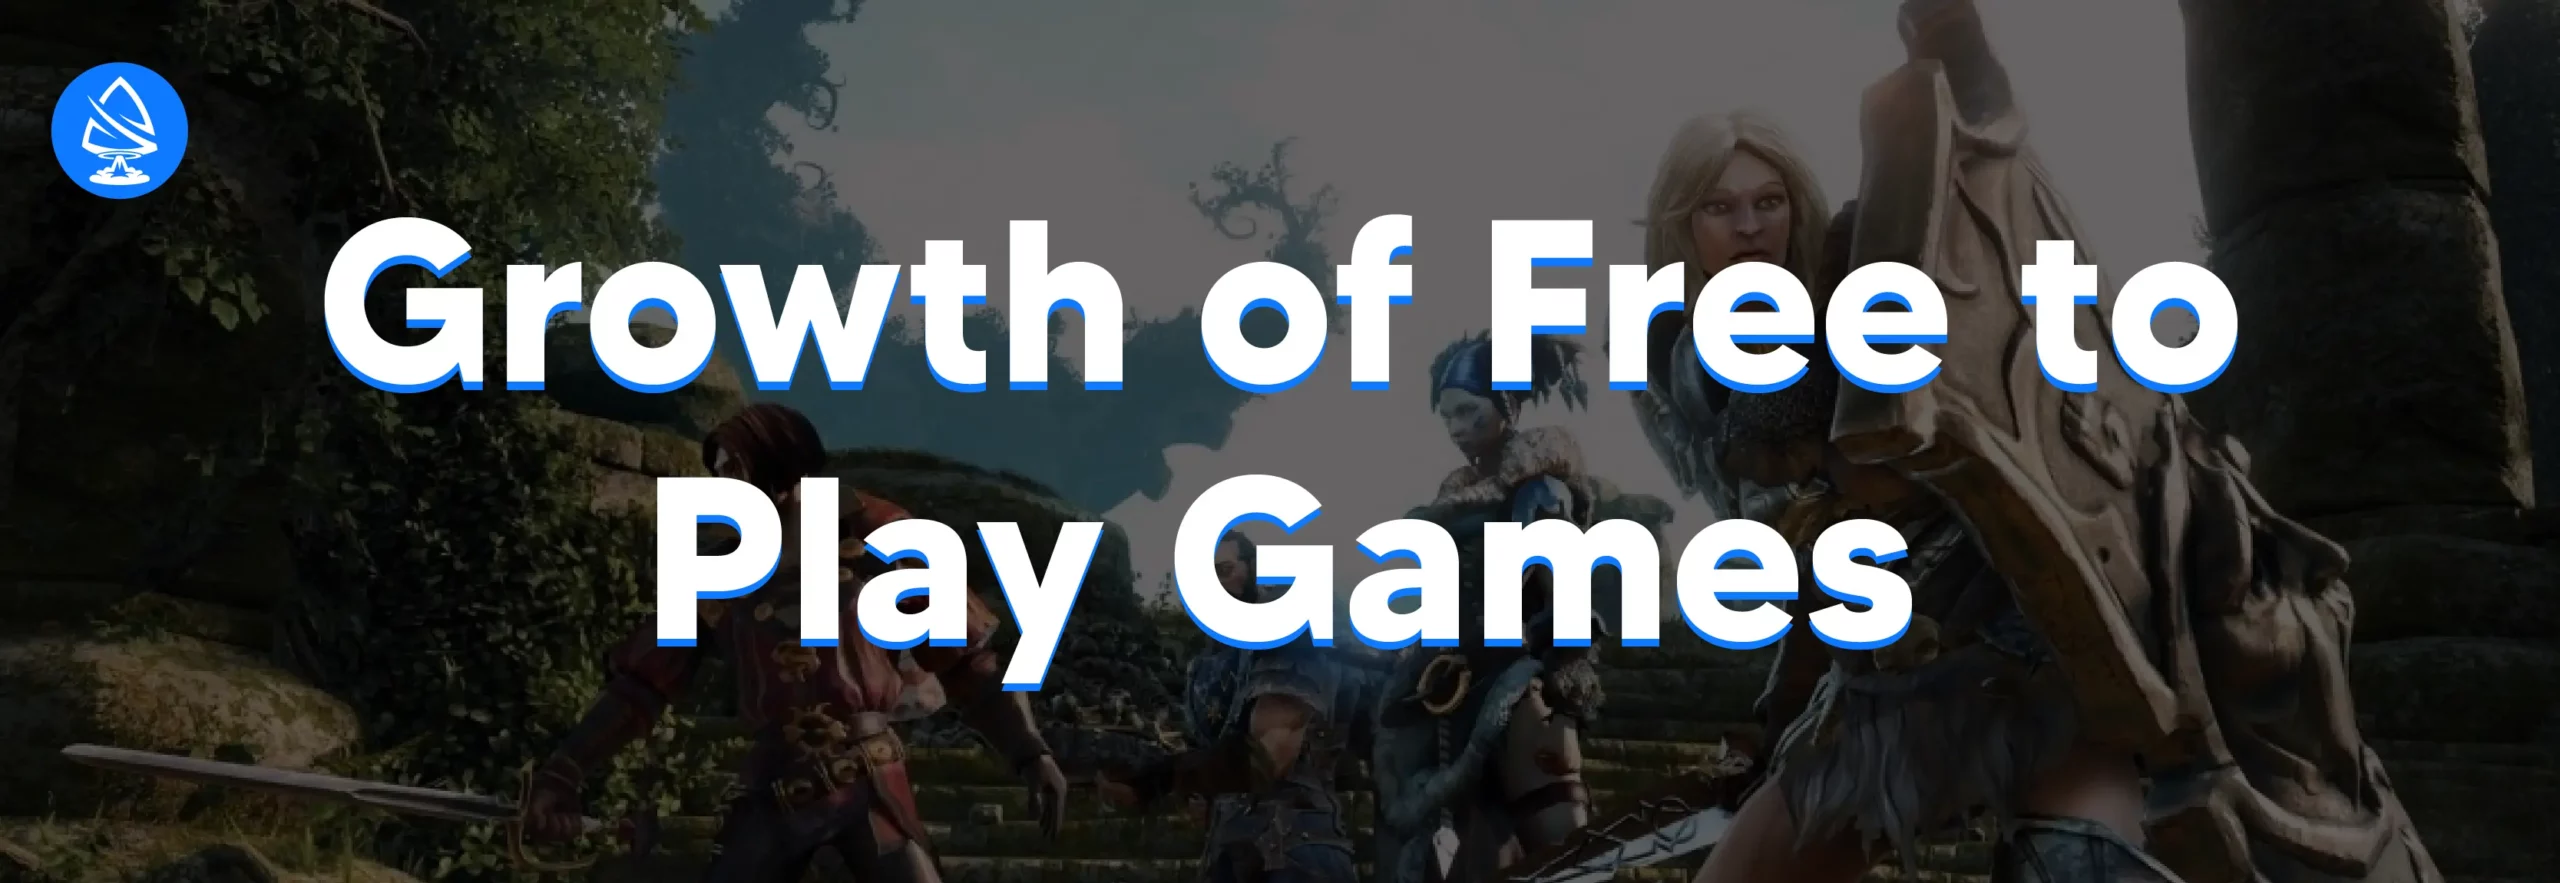 Growth of Free-to-Play Games